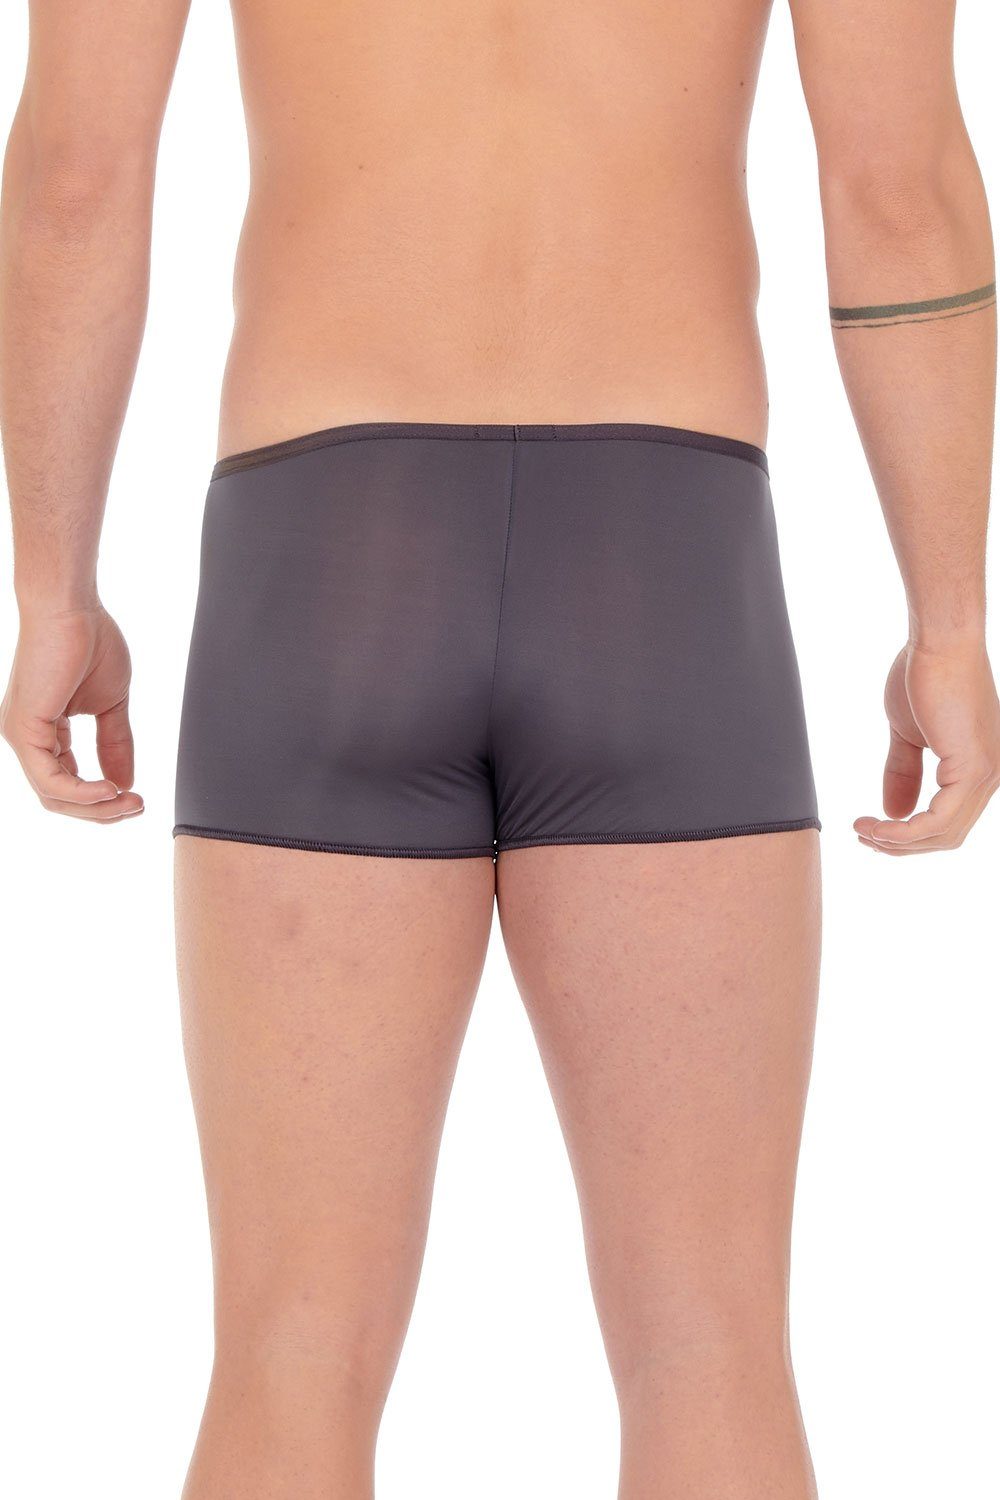 Hipster anthracite Trunk Hom 404755